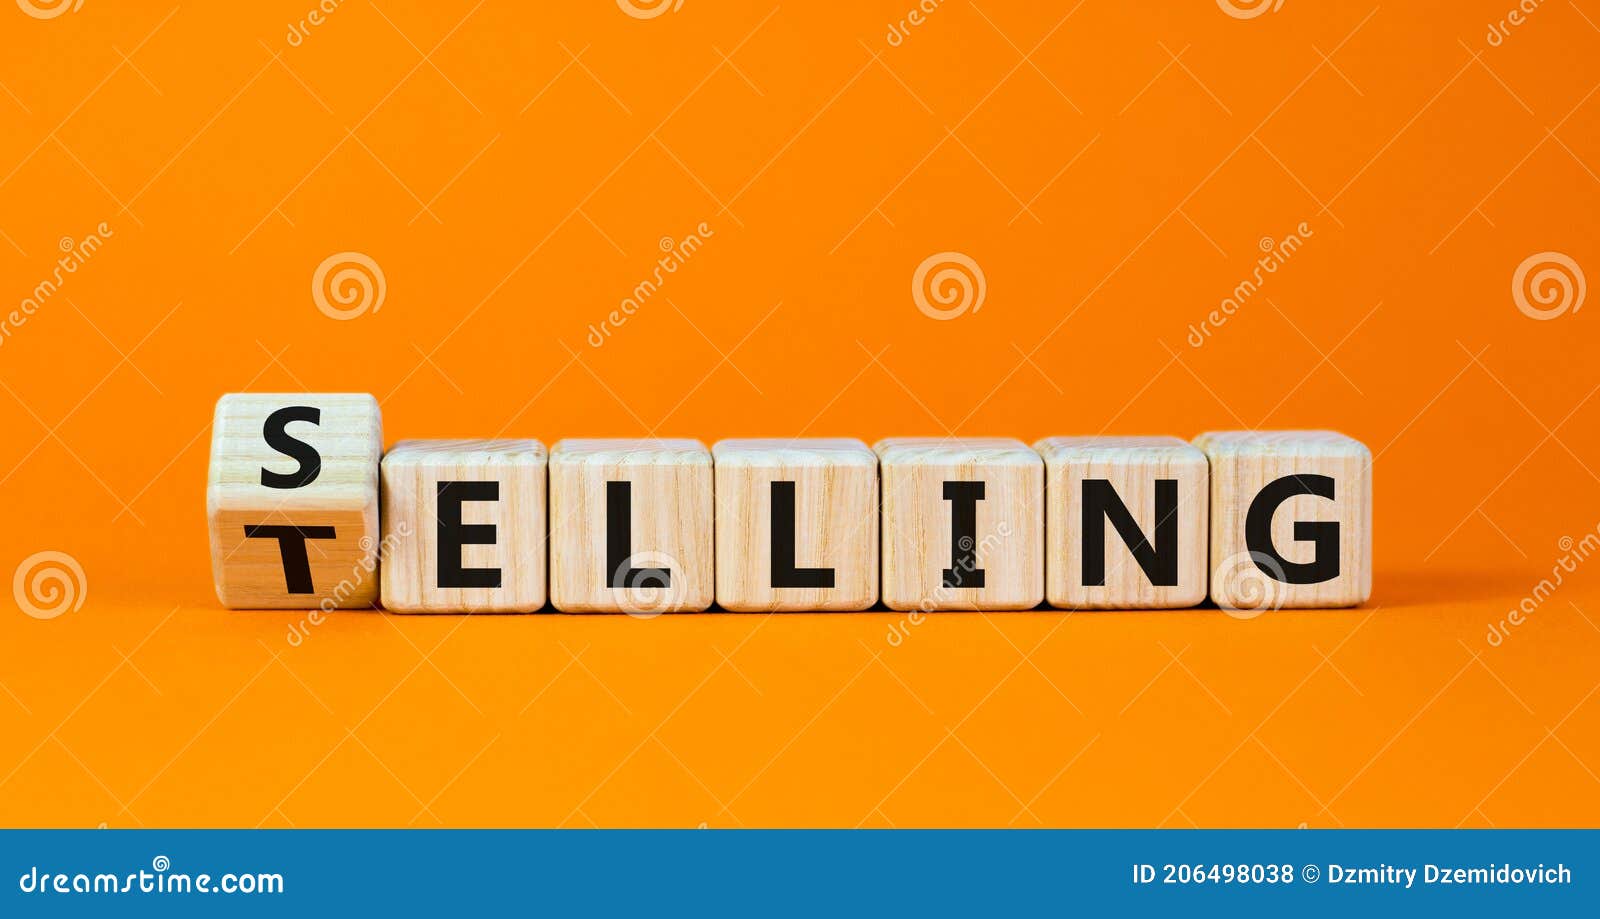 selling or telling . turned wooden cubes and changed the word `telling` to `selling`. beautiful orange background, copy